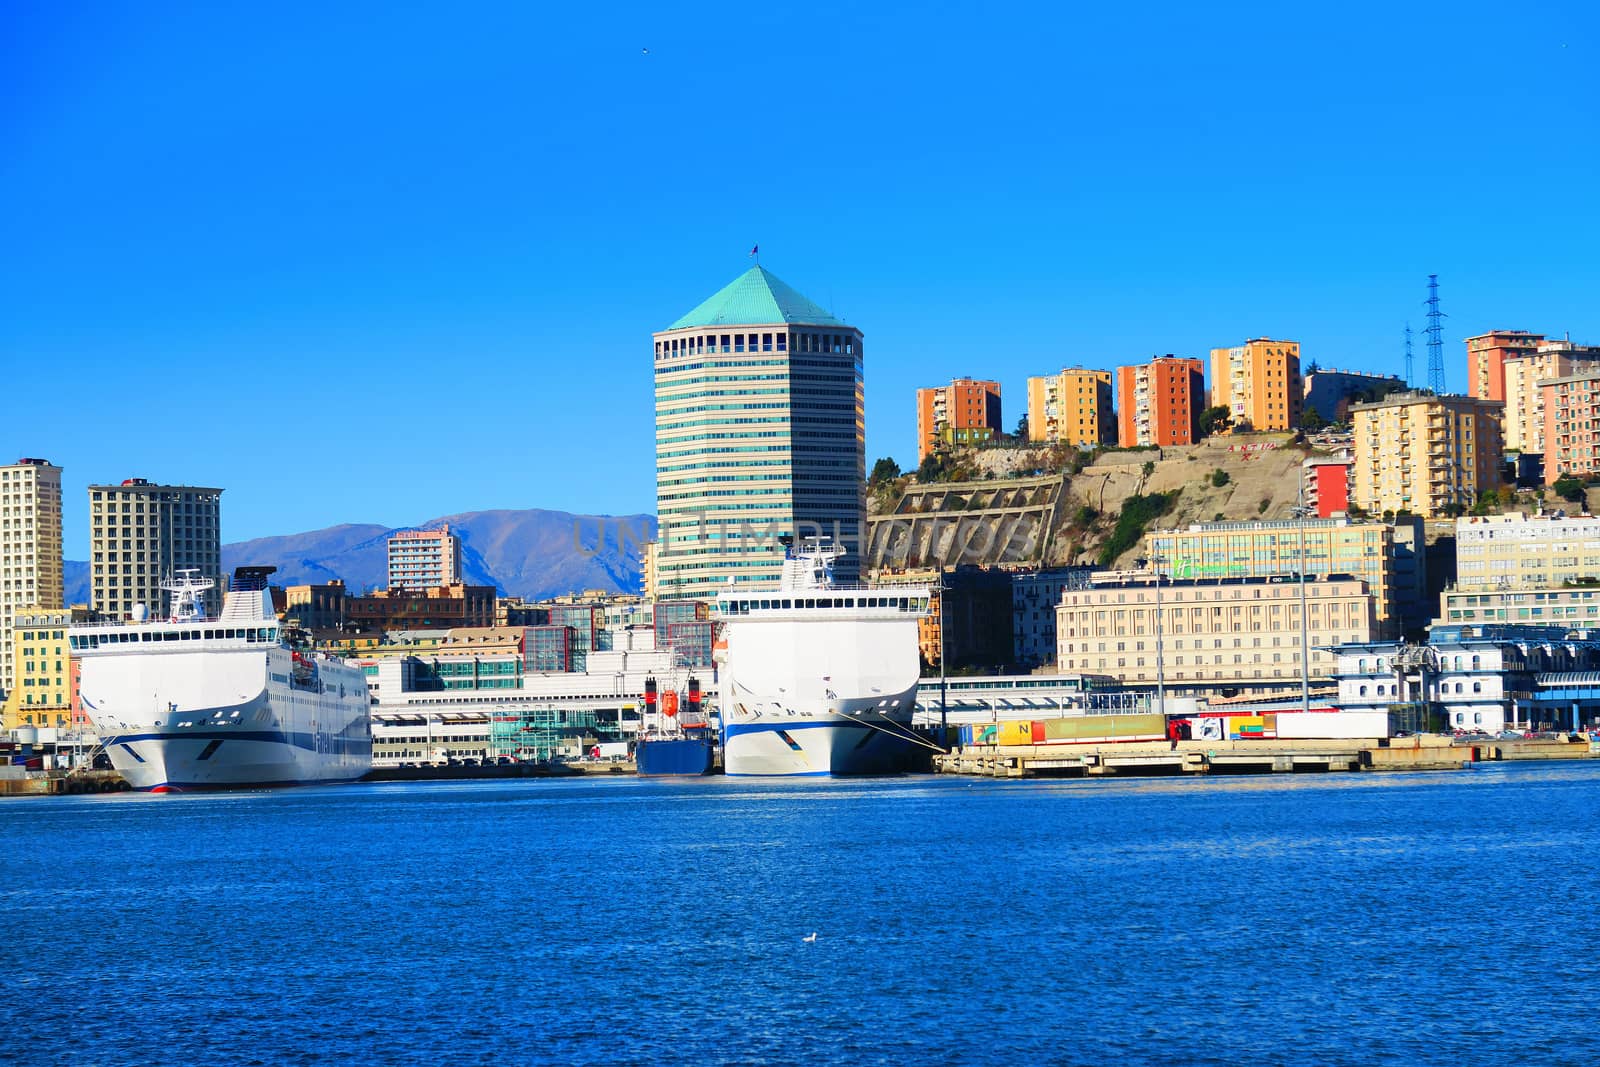 View of the port of Genoa. It is clearly visible the famous "Matitone", an octagonal skyscraper 109 meters high.